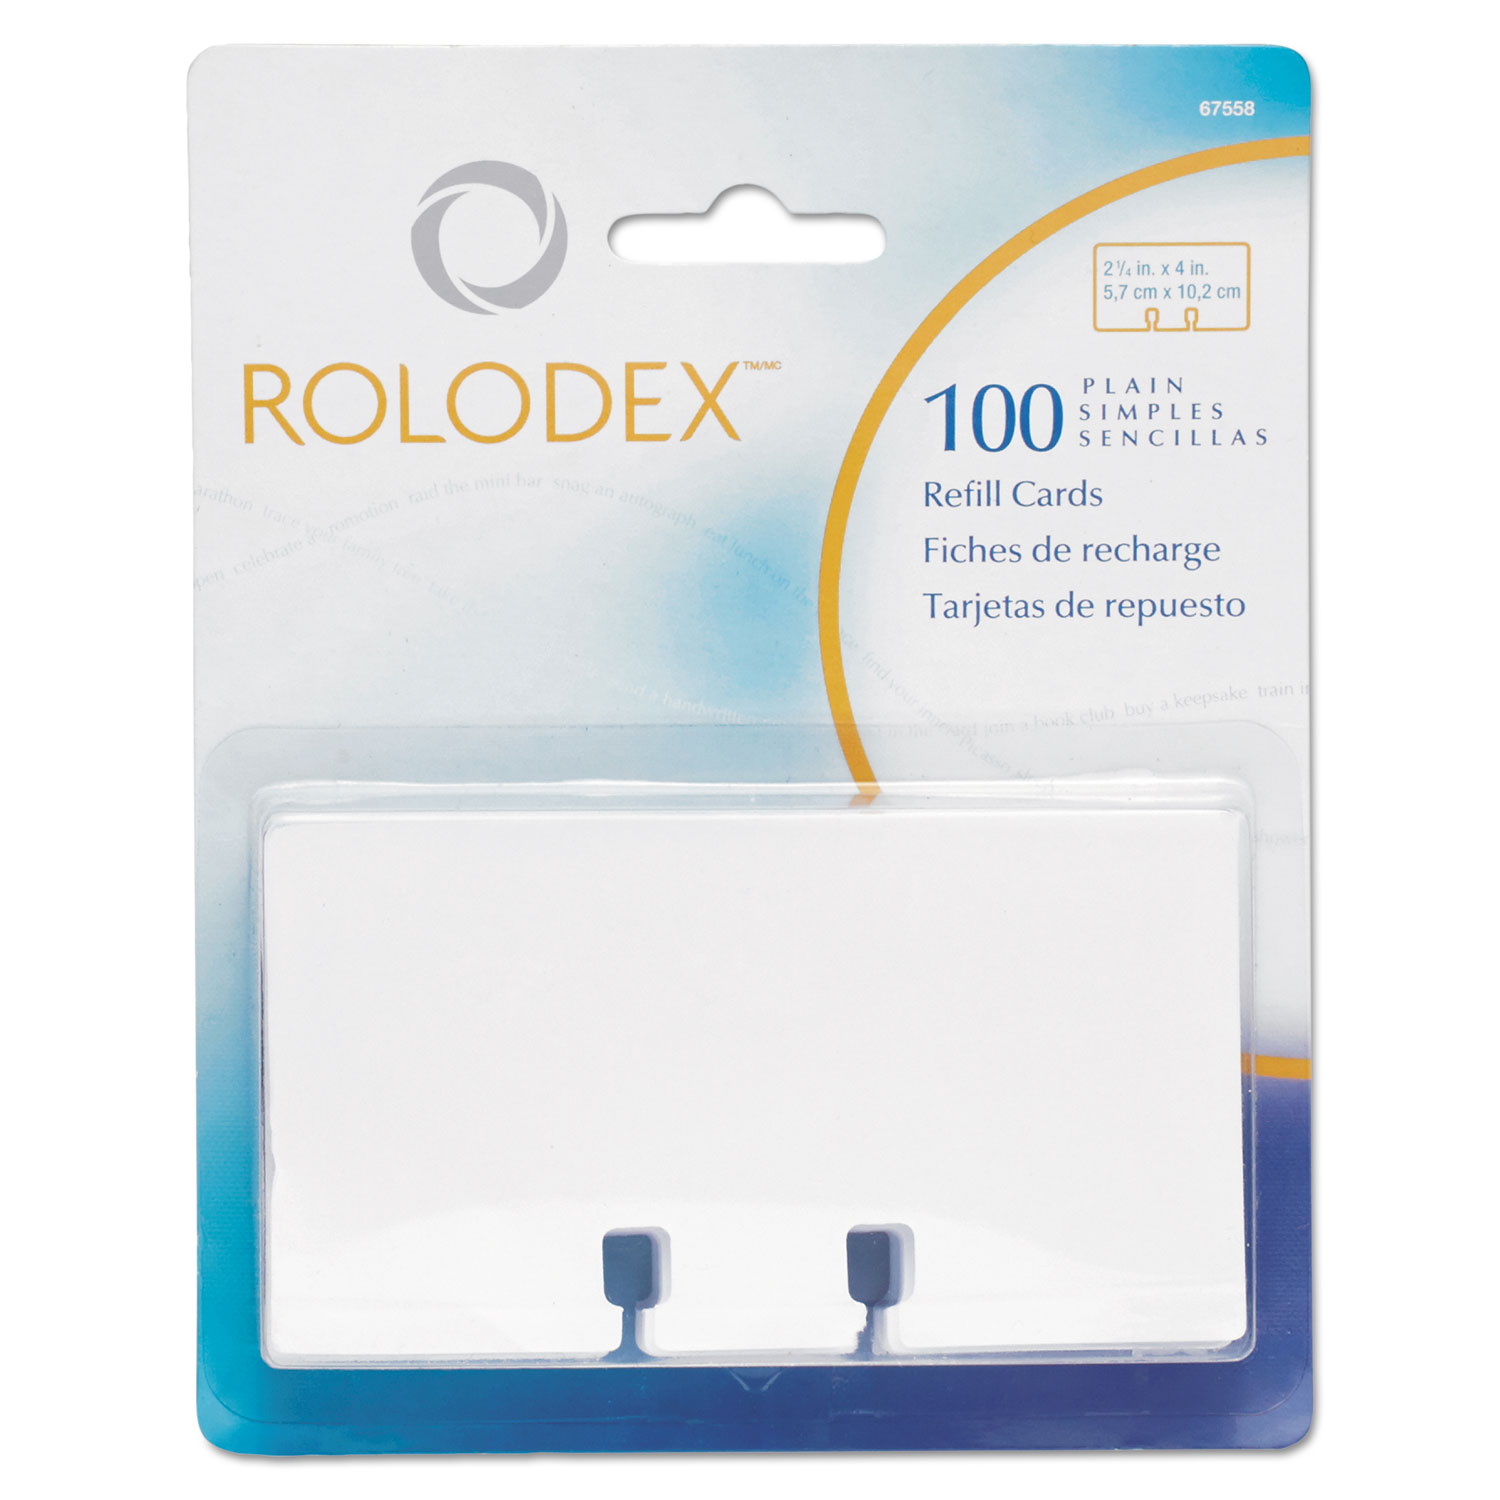  Rolodex 67558 Plain Unruled Refill Card, 2 1/4 x 4, White, 100 Cards/Pack (ROL67558) 